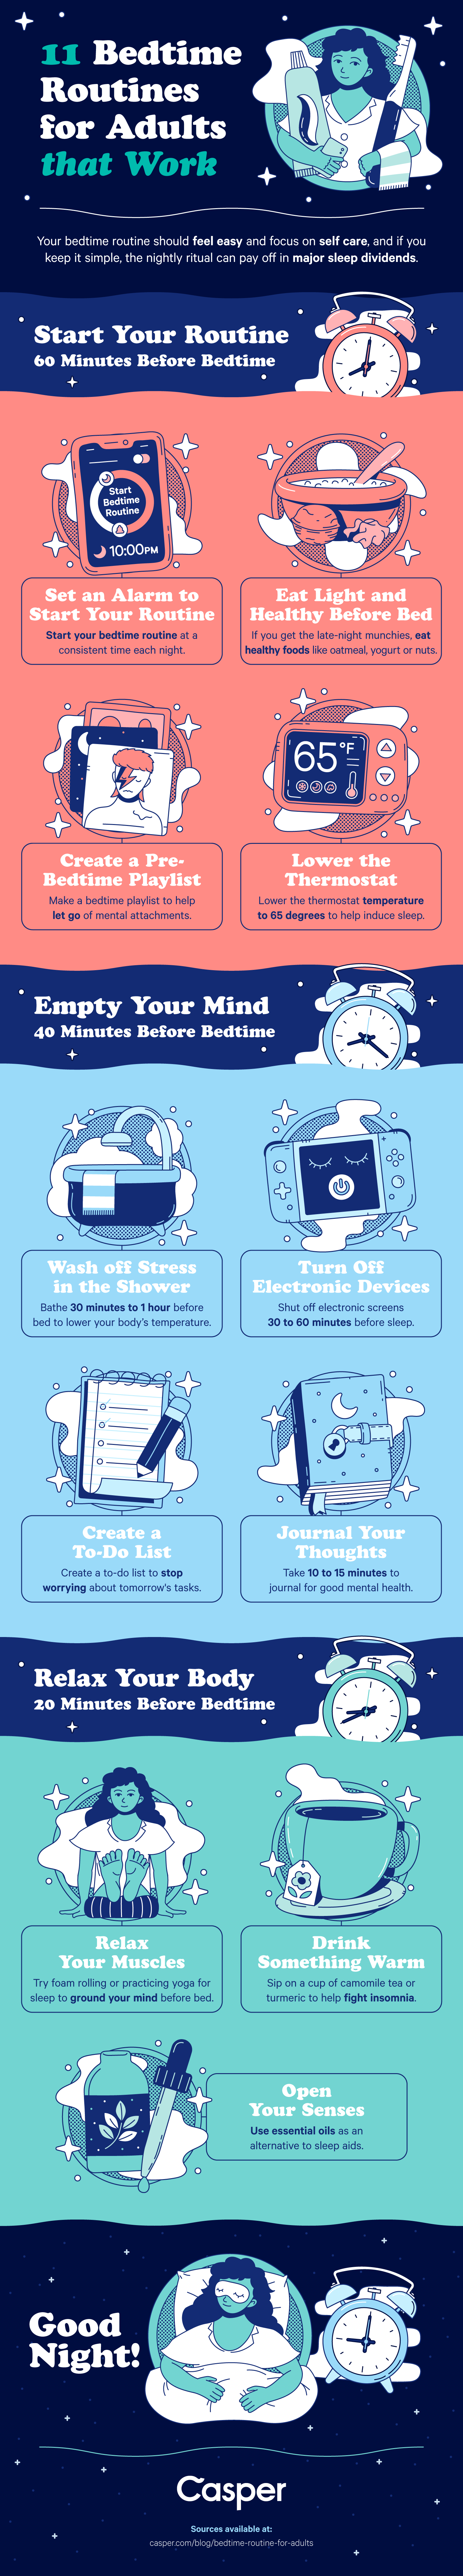 How To Build A Bedtime Routine